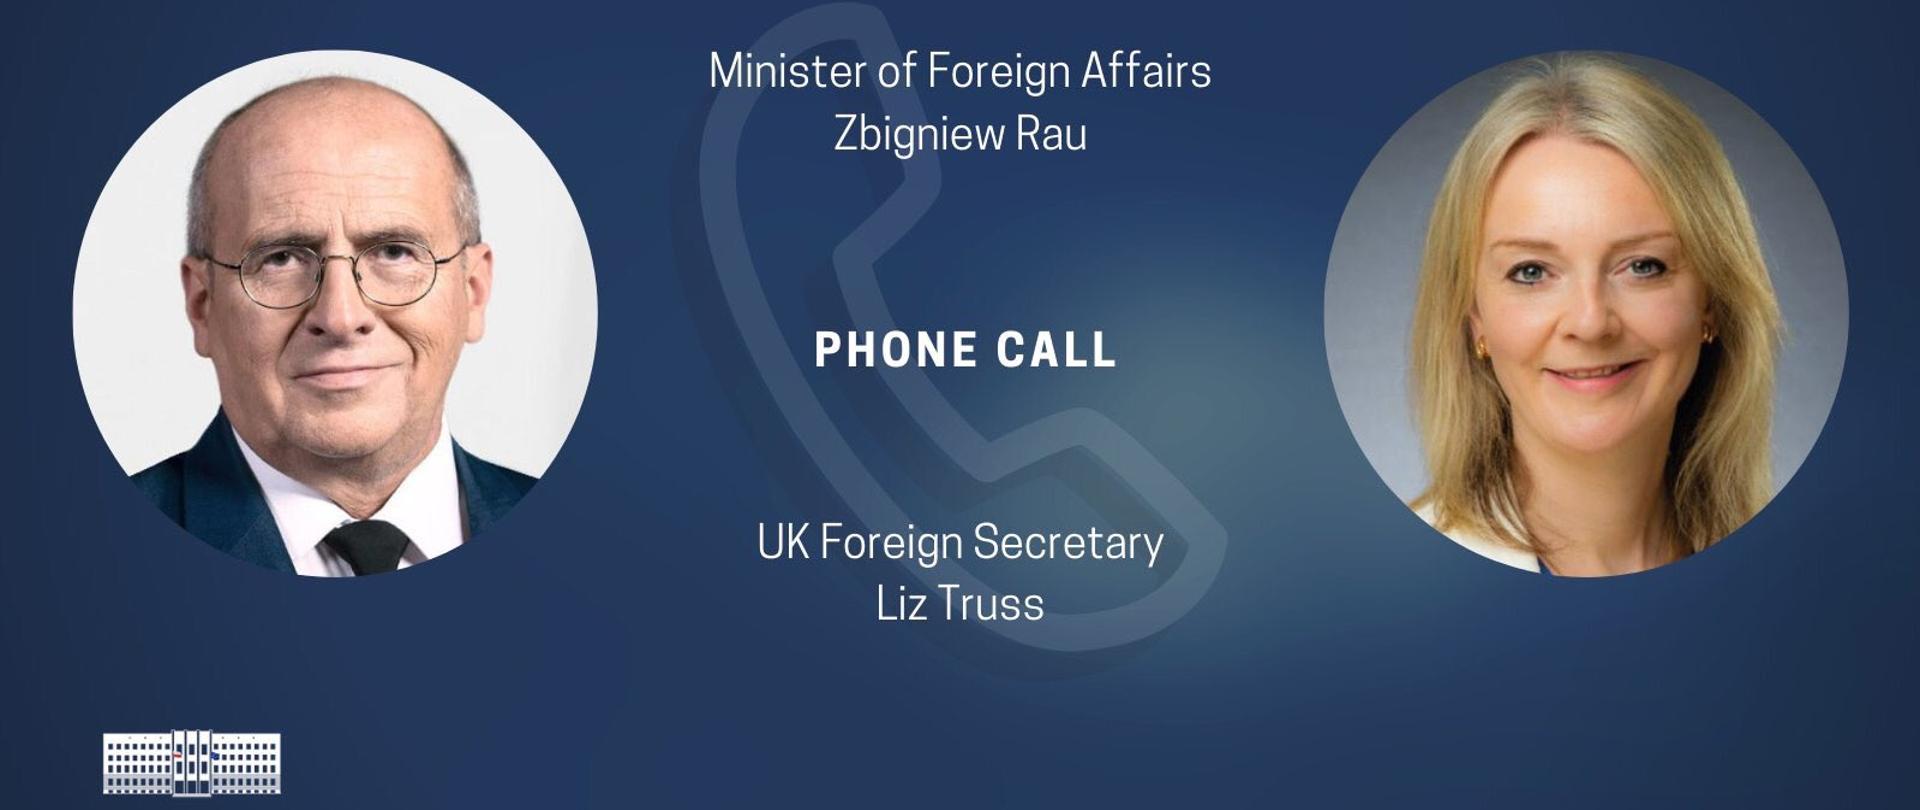 Minister Zbigniew Rau holds telephone conversation with the United Kingdom’s Foreign Secretary Liz Truss